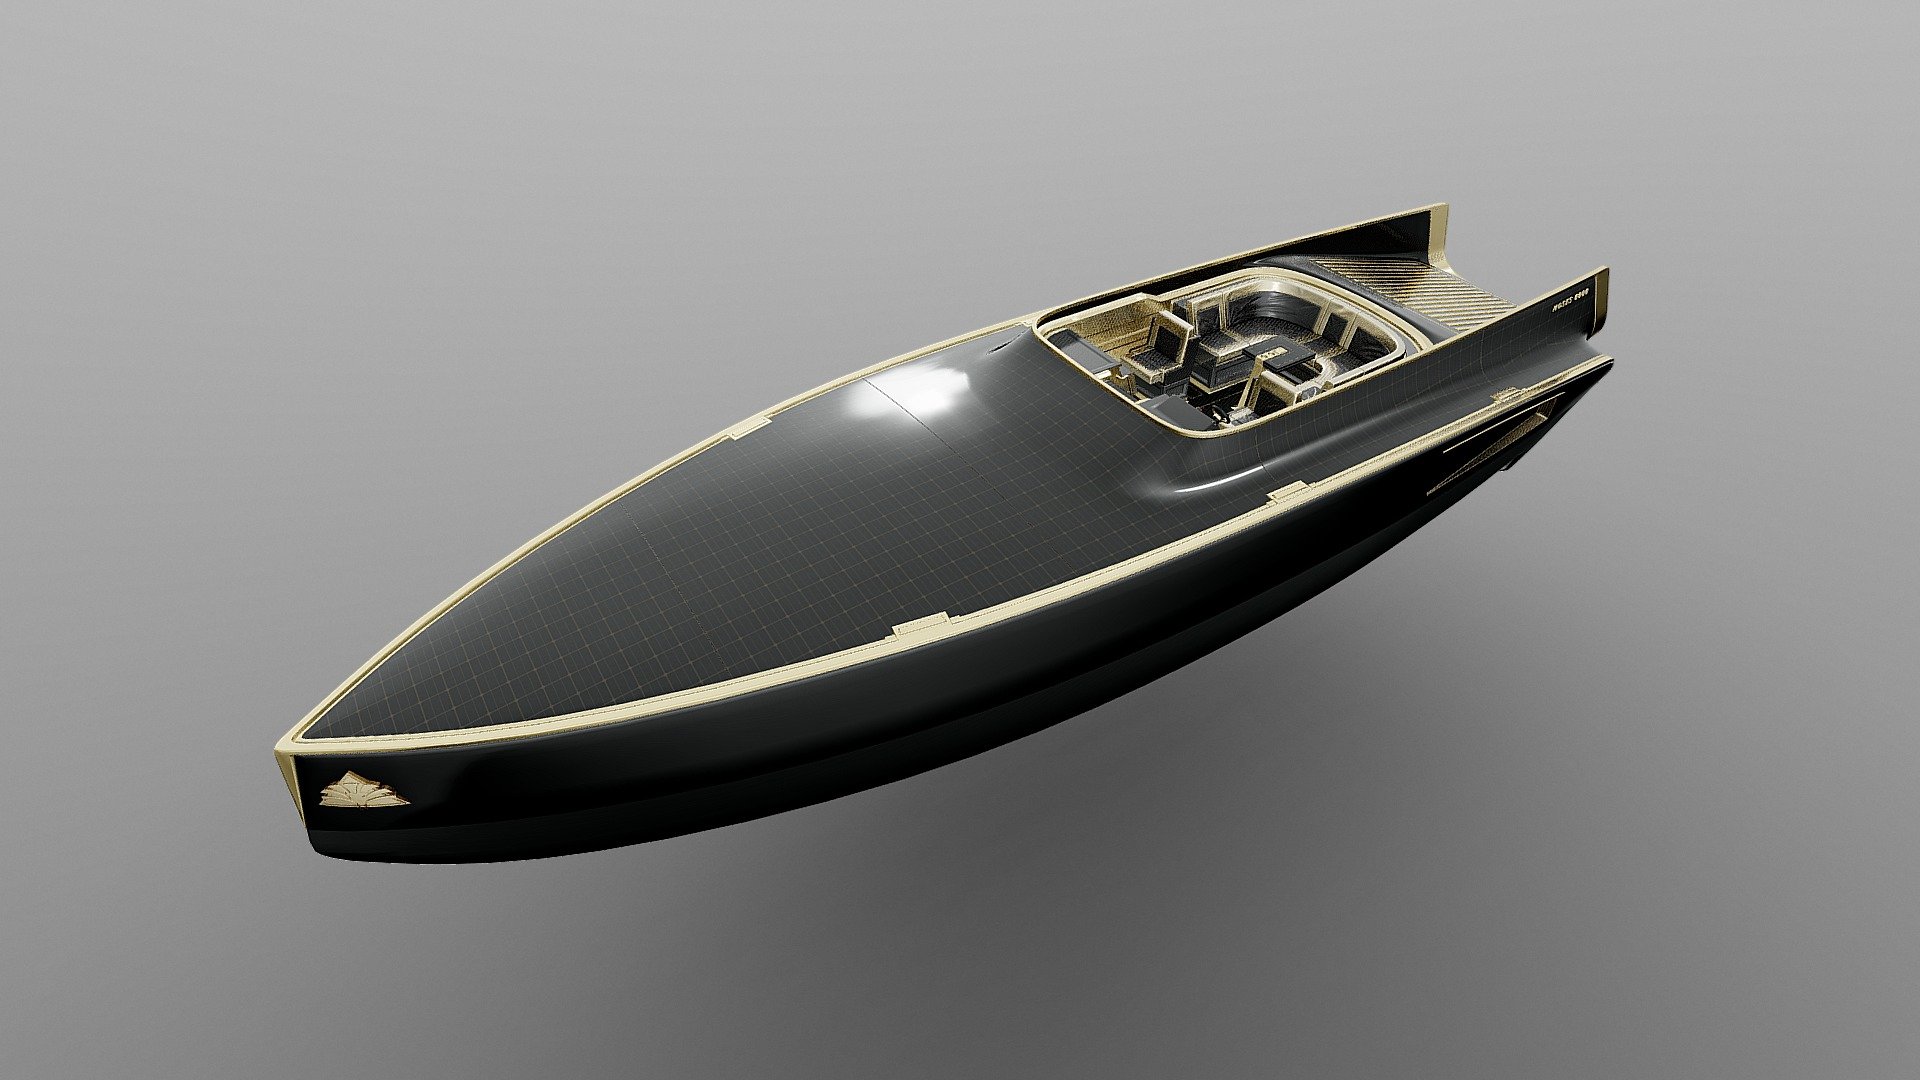 A Luxury electric speedboat concept design. The boat is entirely covered in solar panels, the solar modules are perfectly adapted to the shape of the boat, which transmits extra energy straight to the main battery, which powers groundbreaking Jupiter Jets equipped with more effective inverted turbines capable of reaching high speeds with zero-emission. The 3D model is optimized for real-time engines such as Unreal Engine and Unity. The speedboat was created and modeled with ZBrush and textured with Adobe Substance 3D Painter. 

Also, check out the MOSES 9000!  https://skfb.ly/ovnGW

For more visit   

ArtStation: https://www.artstation.com/artwork/g8d8LG    

Behance: https://www.behance.net/gallery/145902527/MOSES-6000-VR

Thank you for watching! - MOSES 6000 - Buy Royalty Free 3D model by Bartholomew Koziel (@bkoziel) 3d model